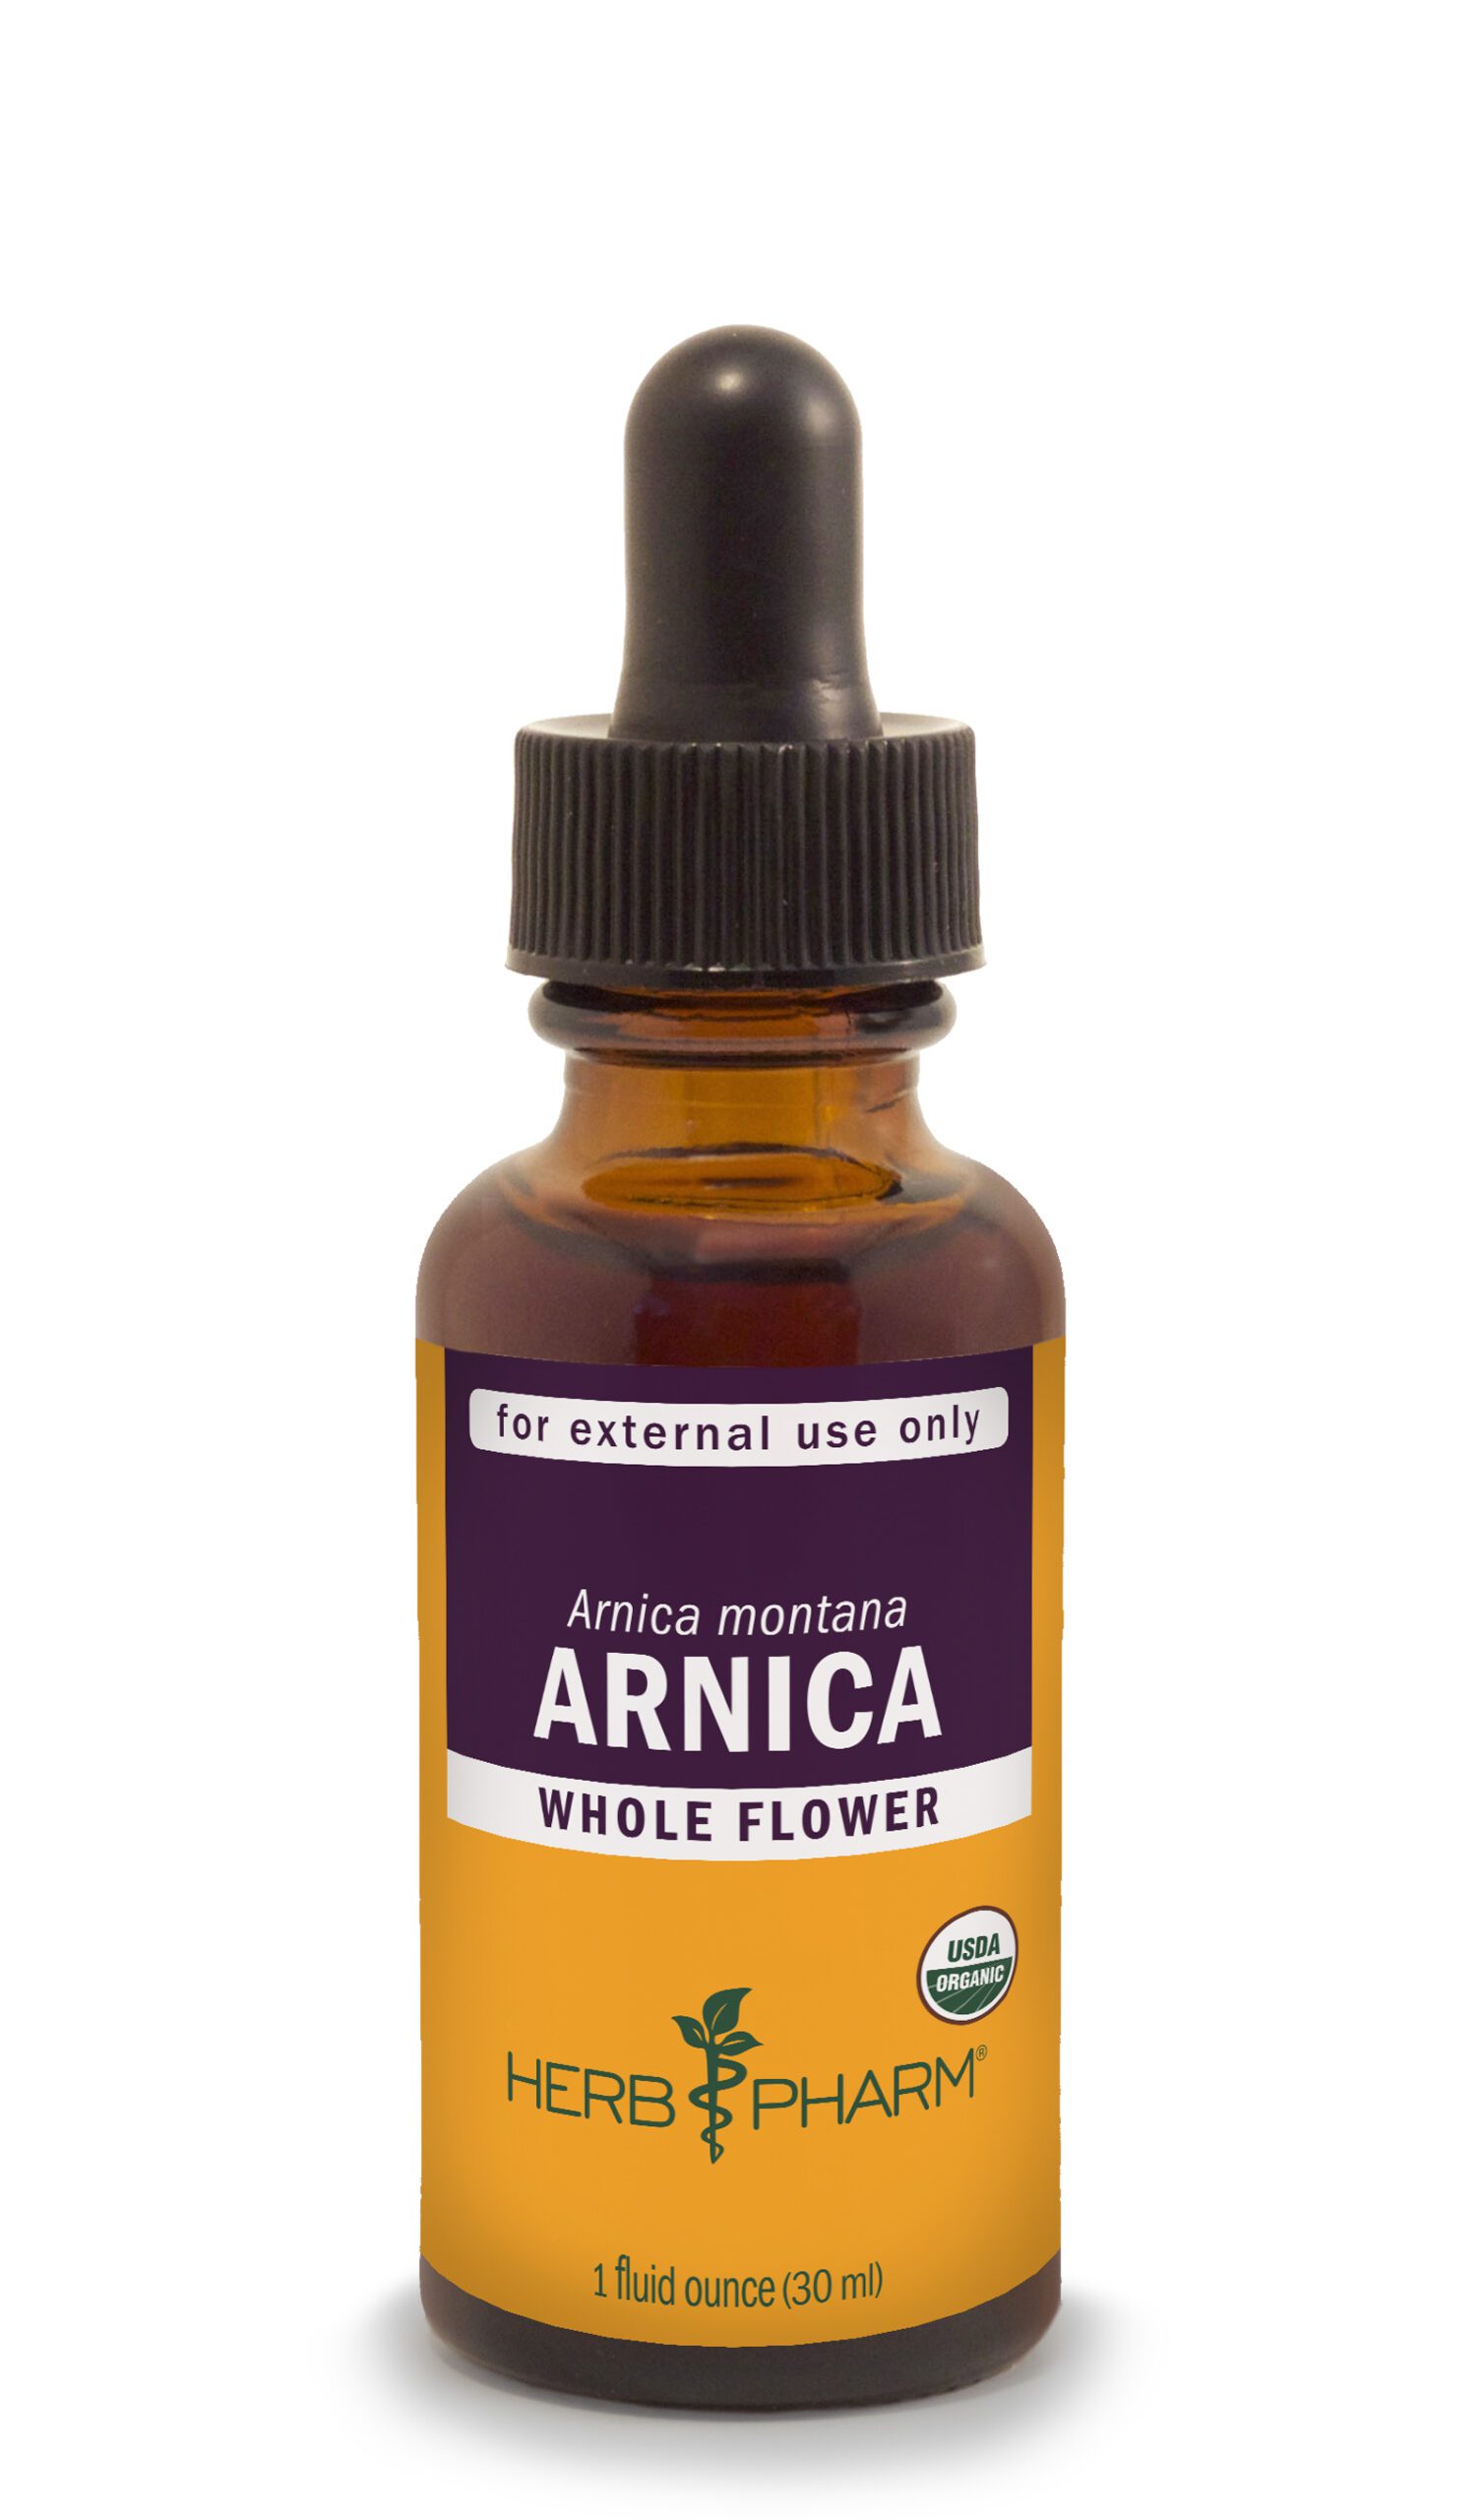 Product Listing Image for Herb Pharm Arnica Tincture